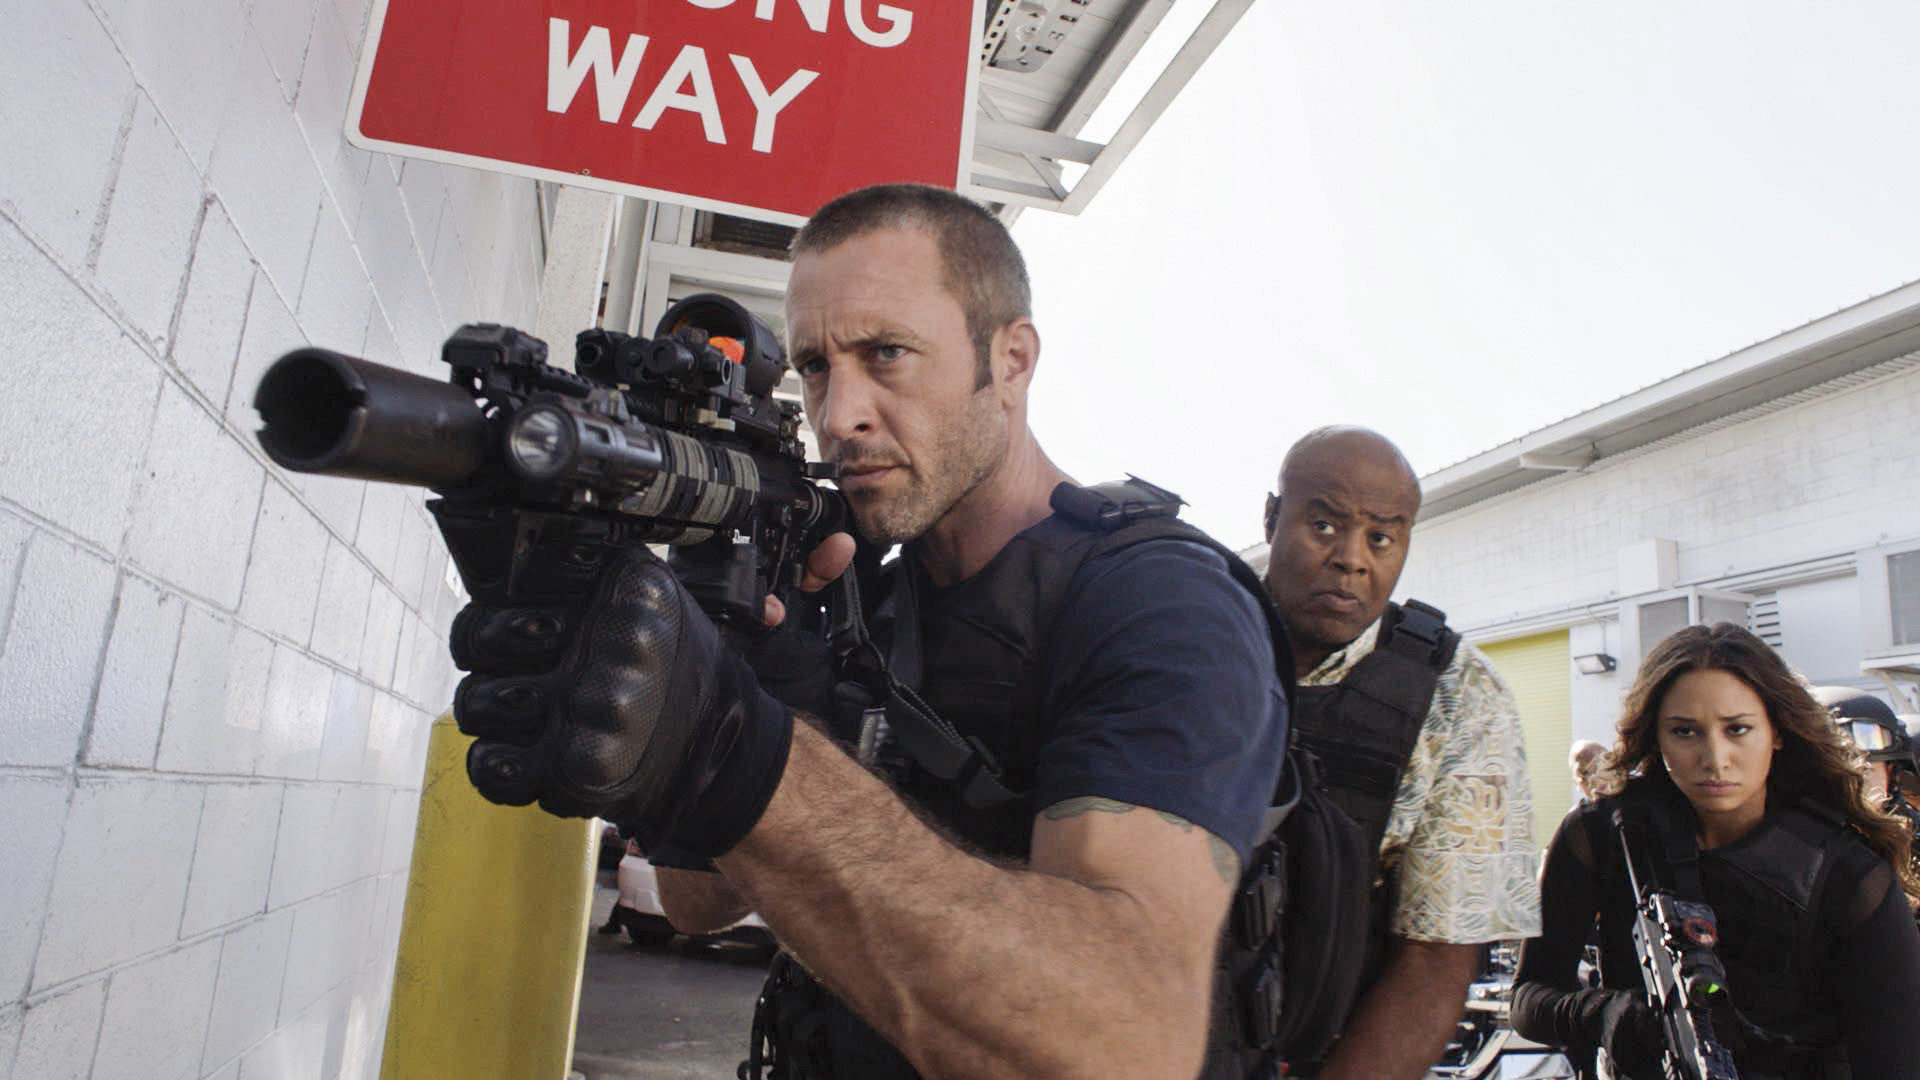 Hawaii Five-0 goes on a gang sweep in 